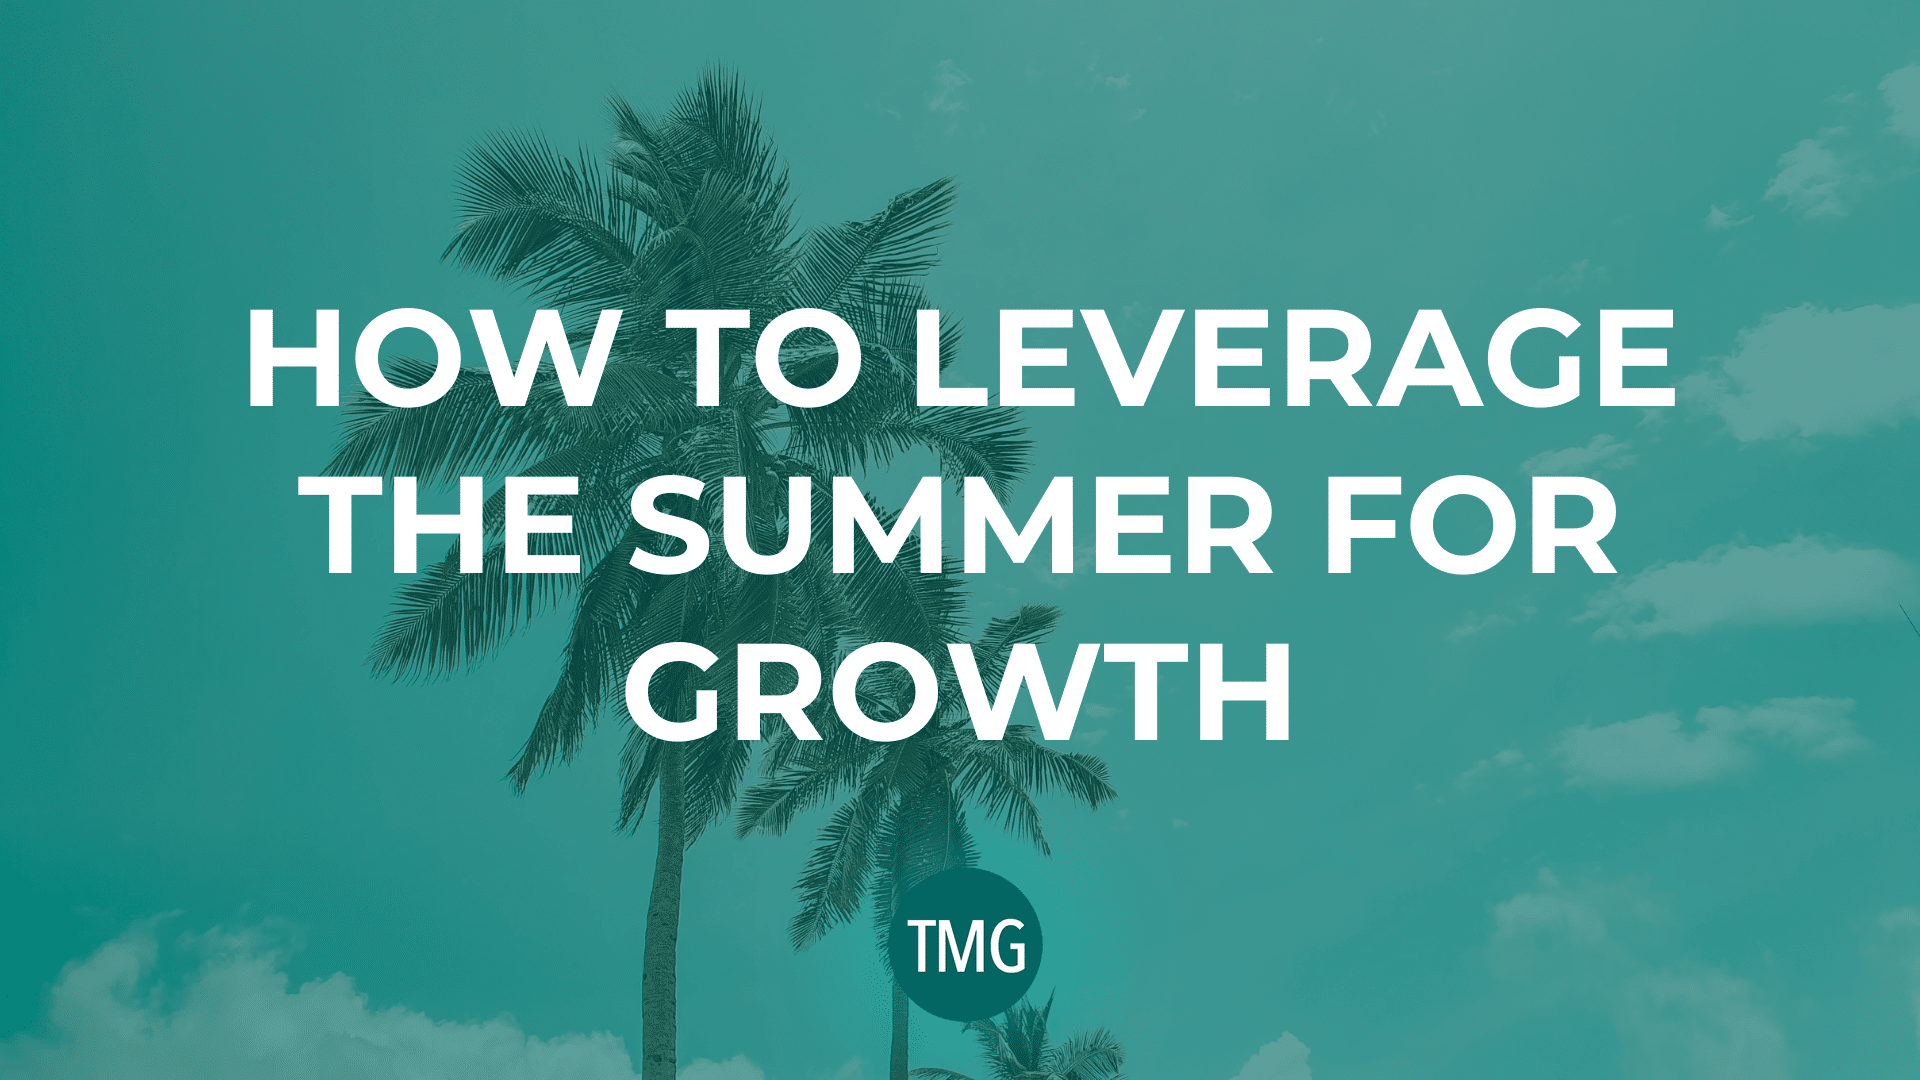 how-to-leverage-the-summer-for-growth_the-malphurs-group_church-revitalization-podcast